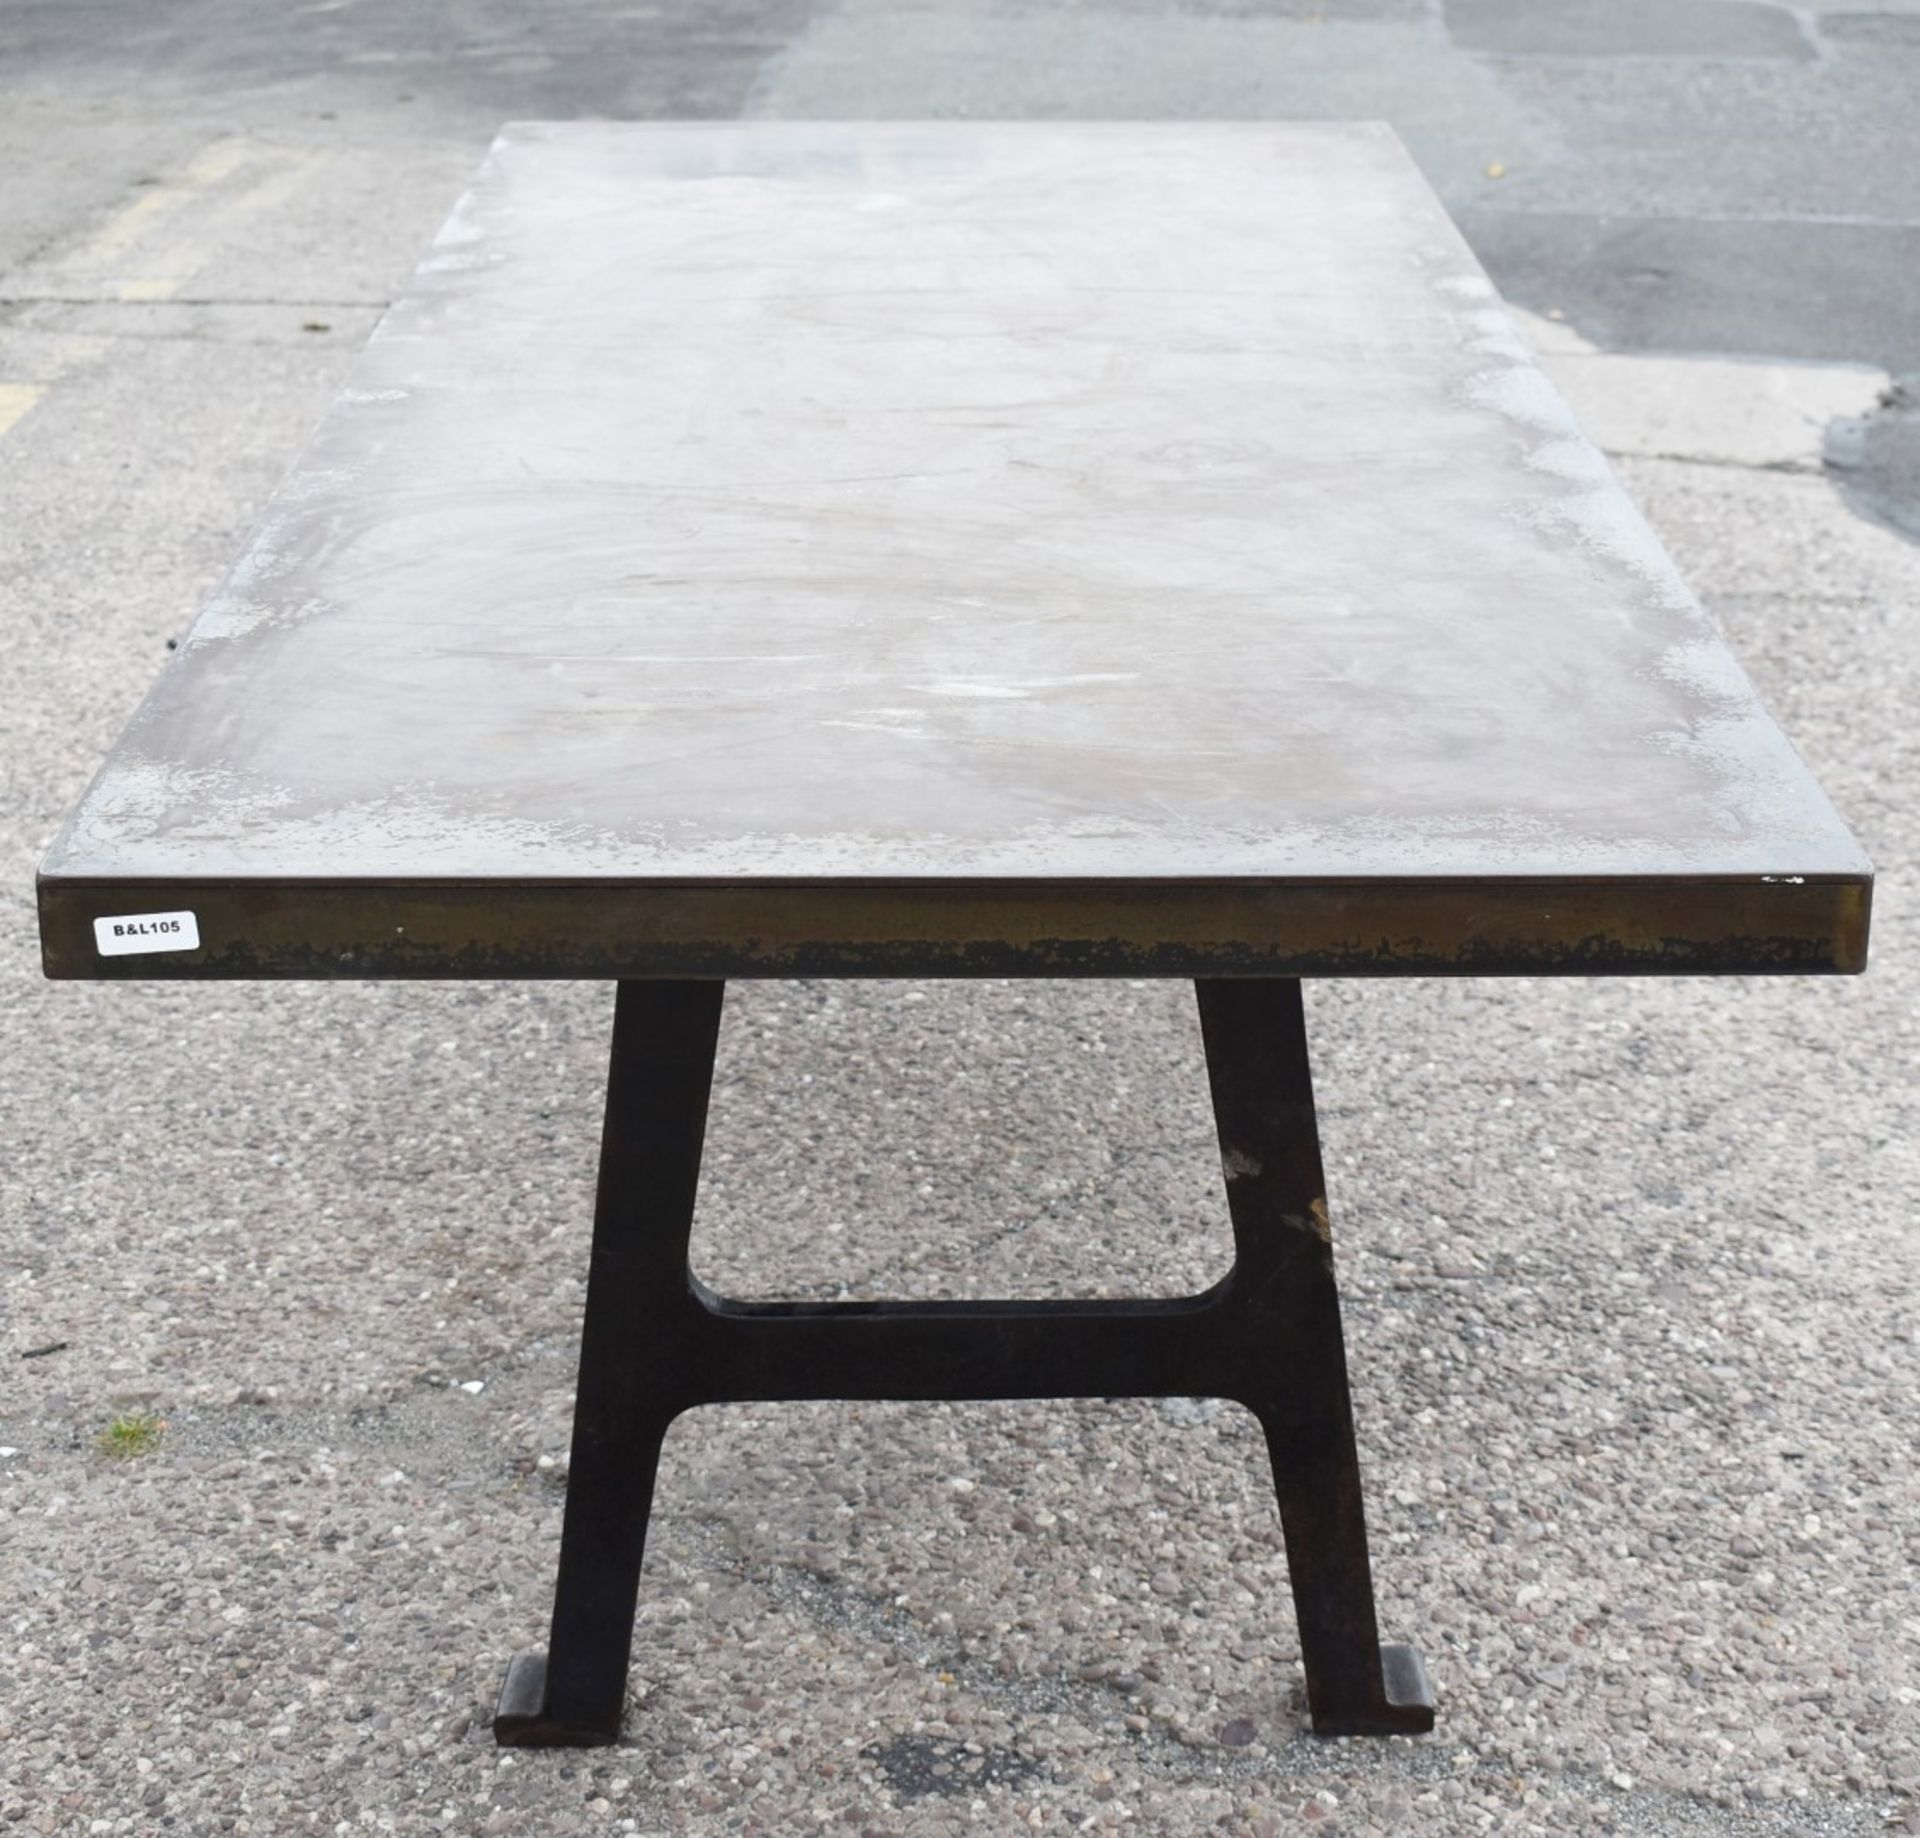 1 x Industrial Style 200cm Banquetting Restaurant Table Featuring a Heavy Steel Top & Steel Legs - Image 20 of 23